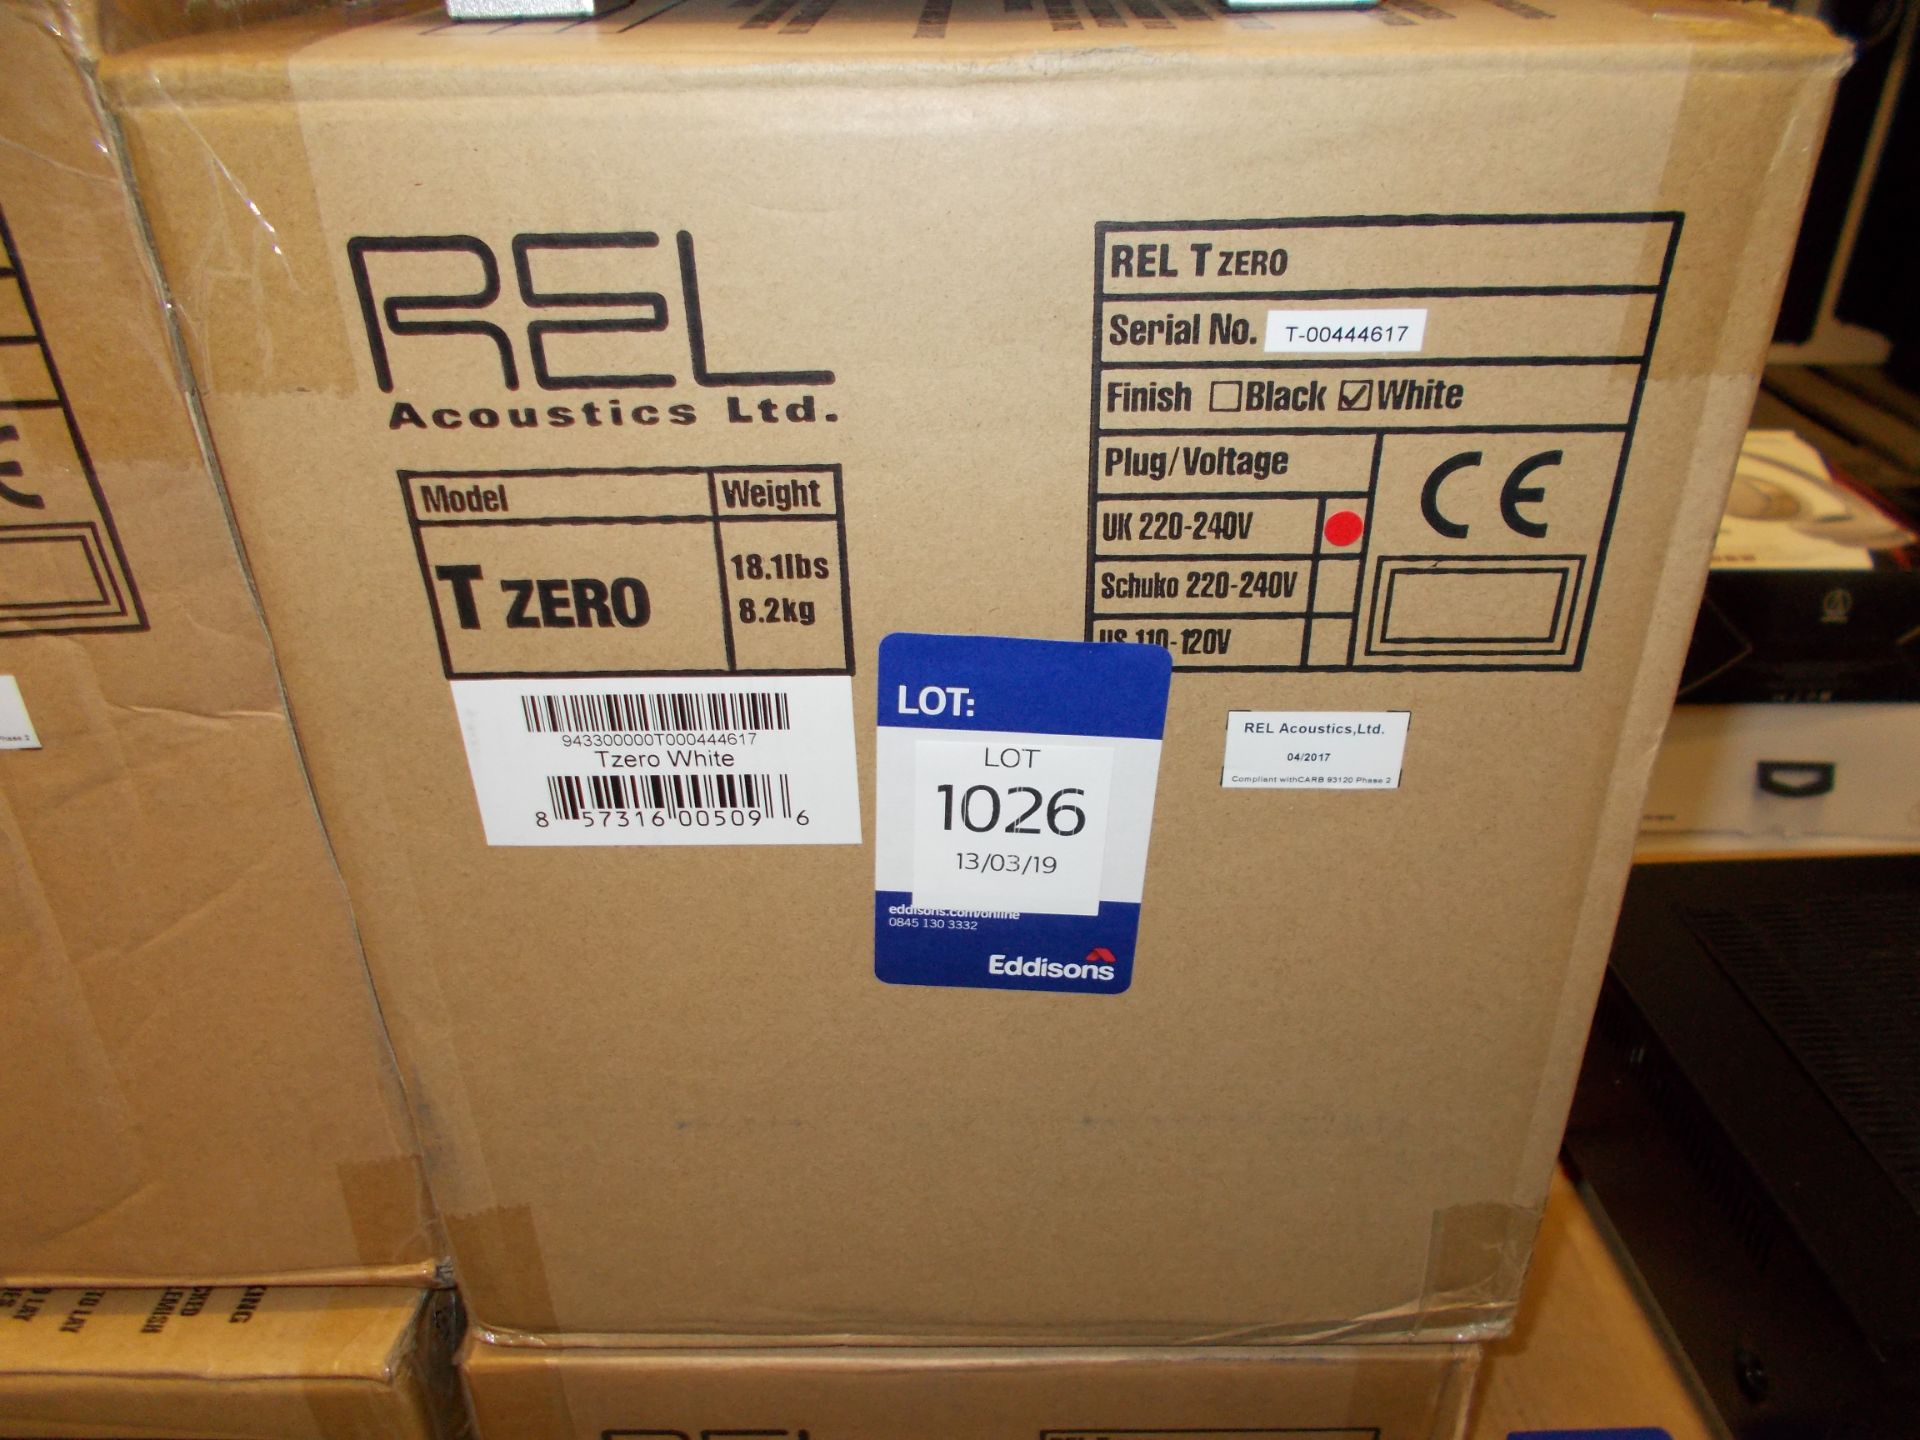 Rel T Zero White Subwoofer (boxed) – RRP £199